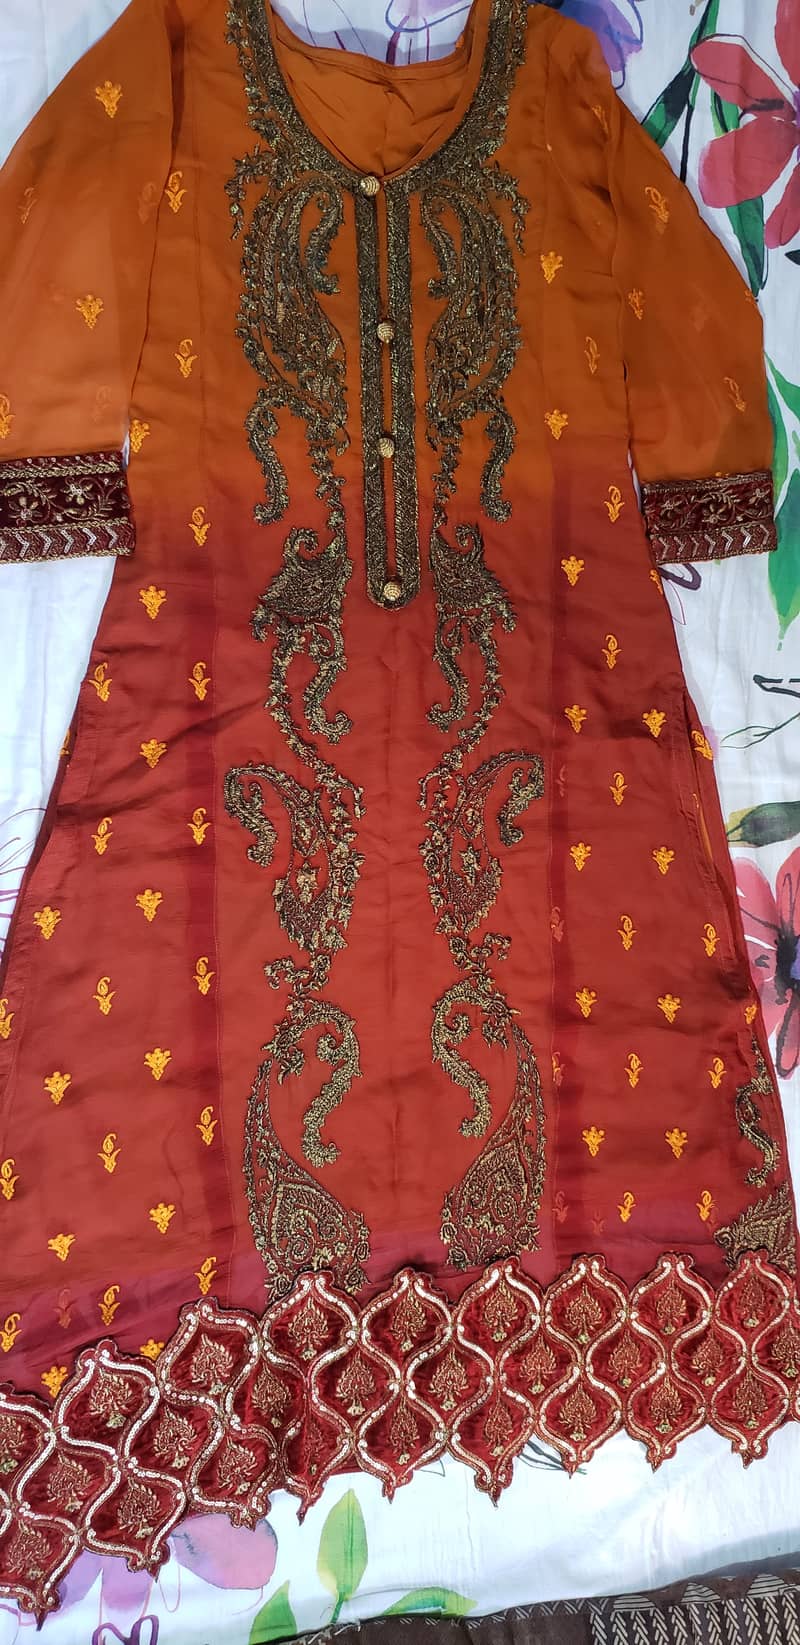 Loot Sale (3 Piece Rust color wedding dress (size small)) 0